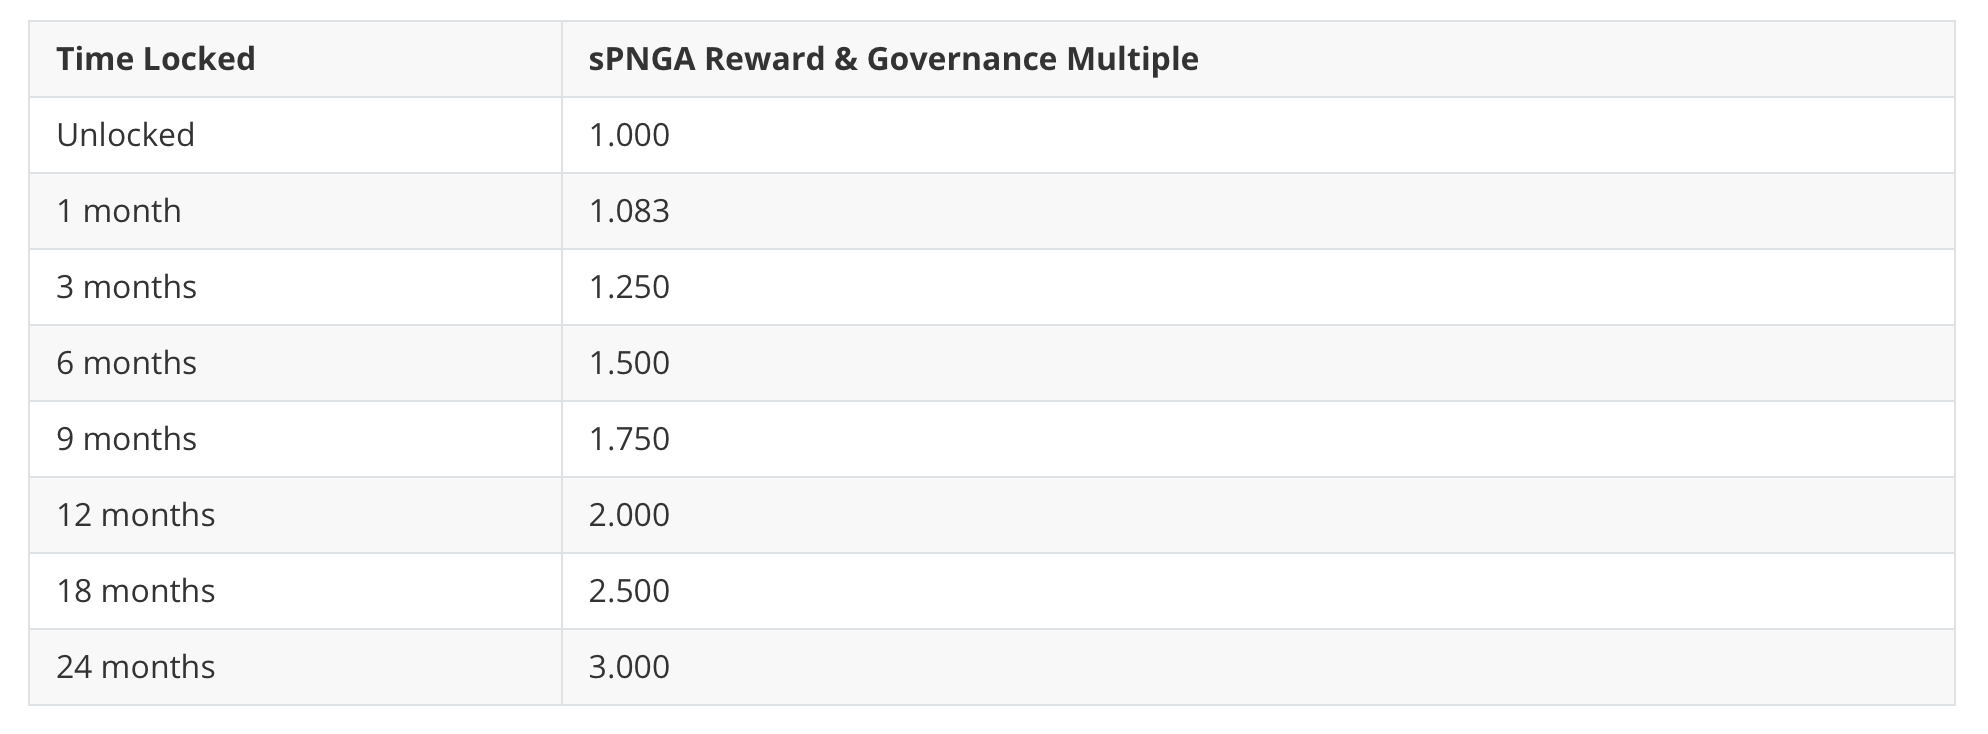 Reward multiple and governance boost = 1 (standard weight) + x/12 (where x is the amount of months locked)